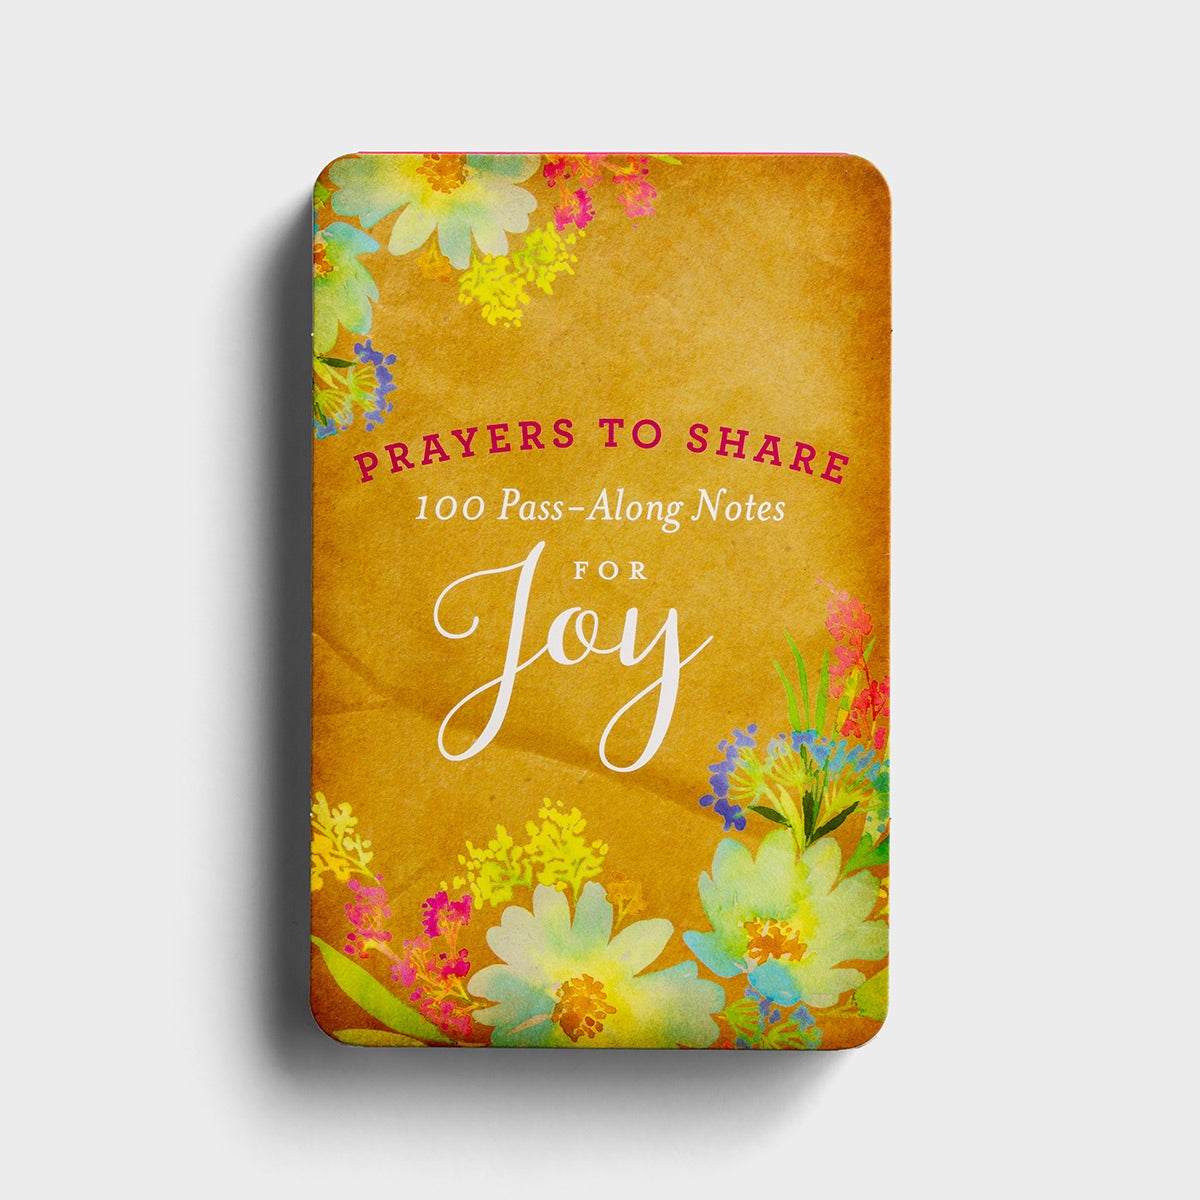 Prayers to Share for Joy - 100 Pass-Along Notes front.